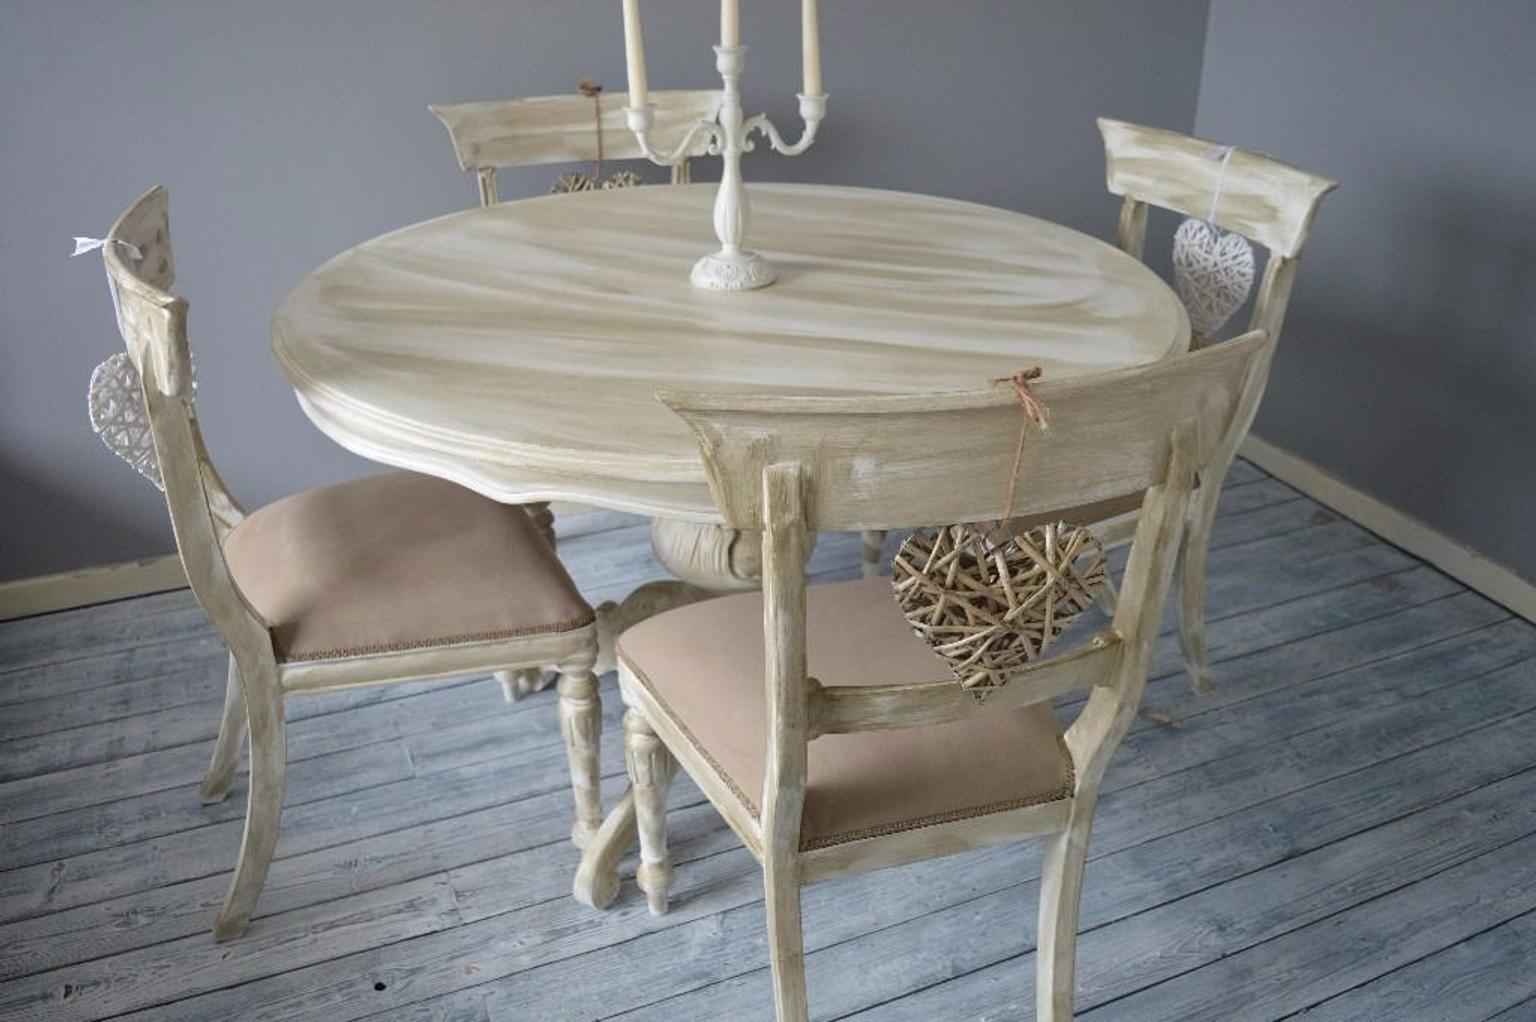 Rustic Round French Dining Table 4 Chairs In M45 Whitefield Fur 250 00 Zum Verkauf Shpock De